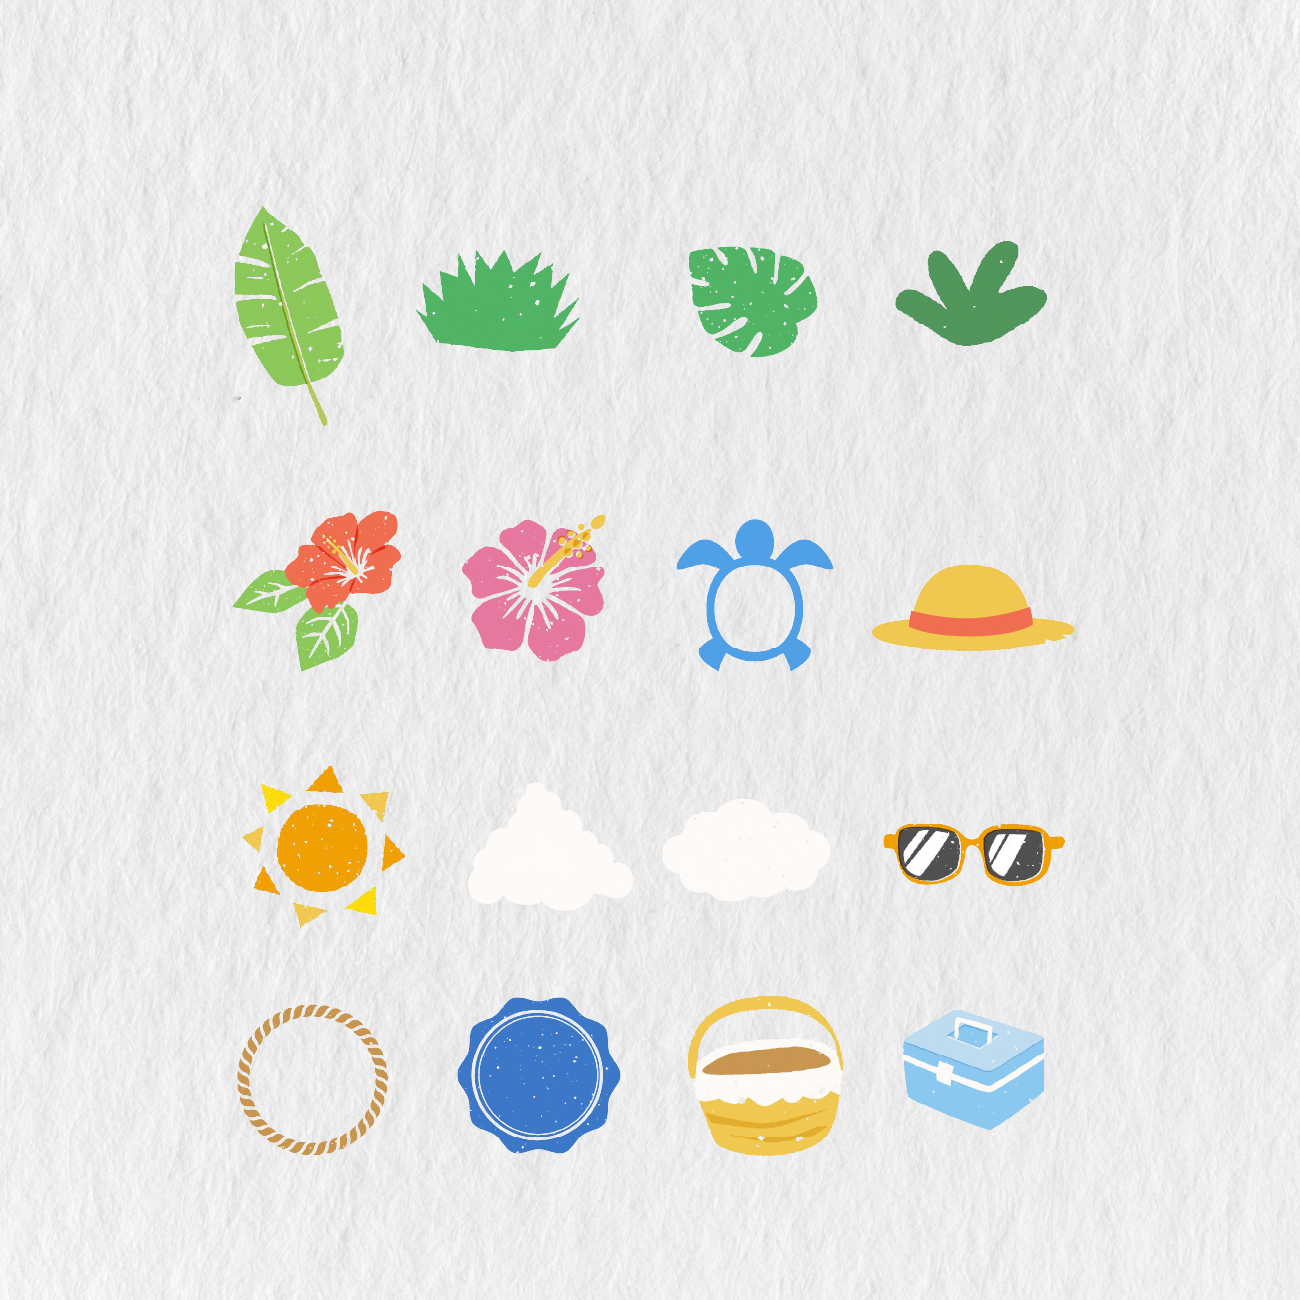 276 Summer Time Digital Stickers - Stationery Pal